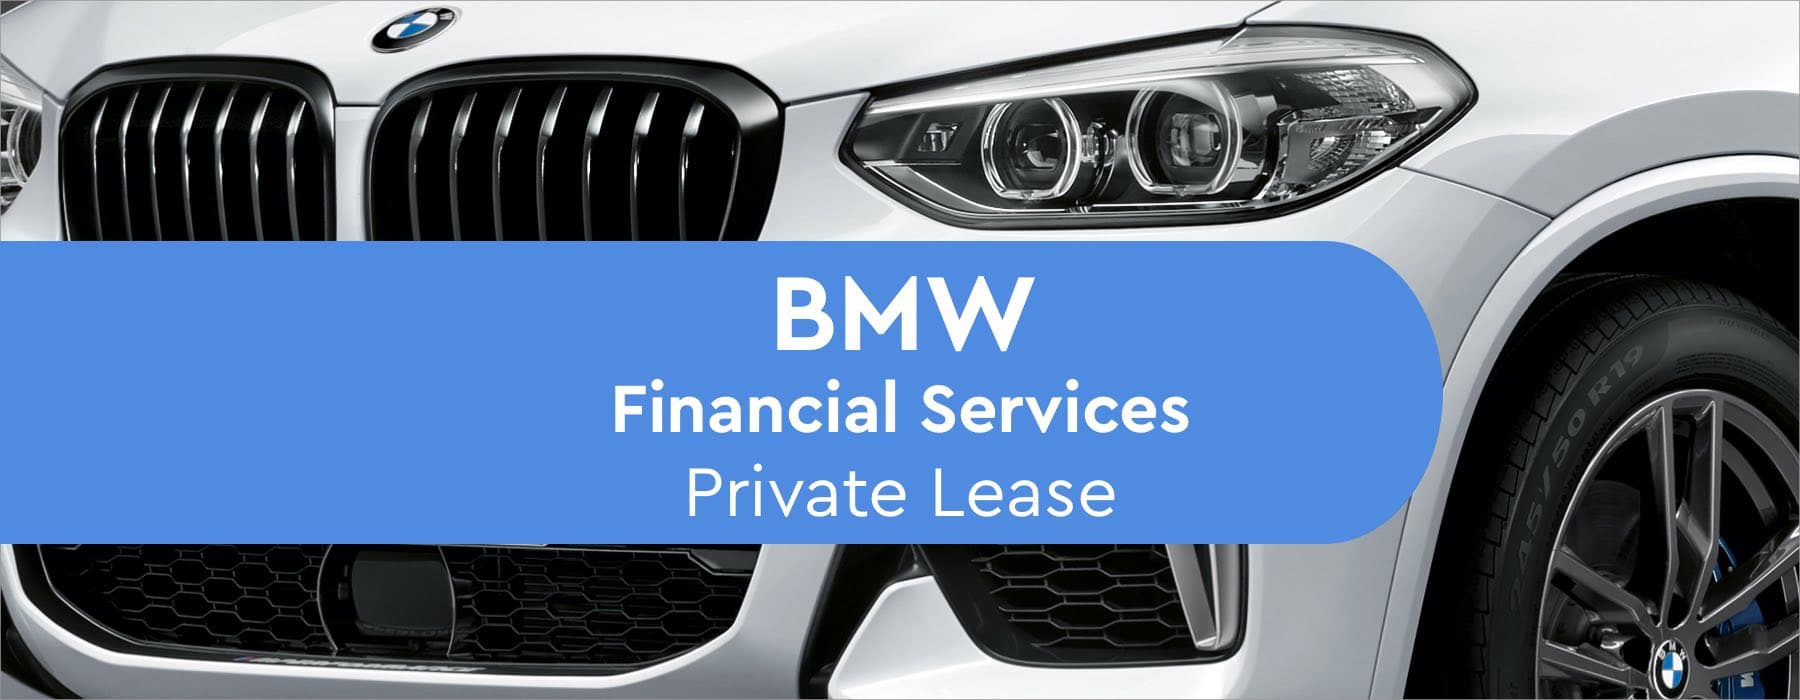 bmw financial services private lease